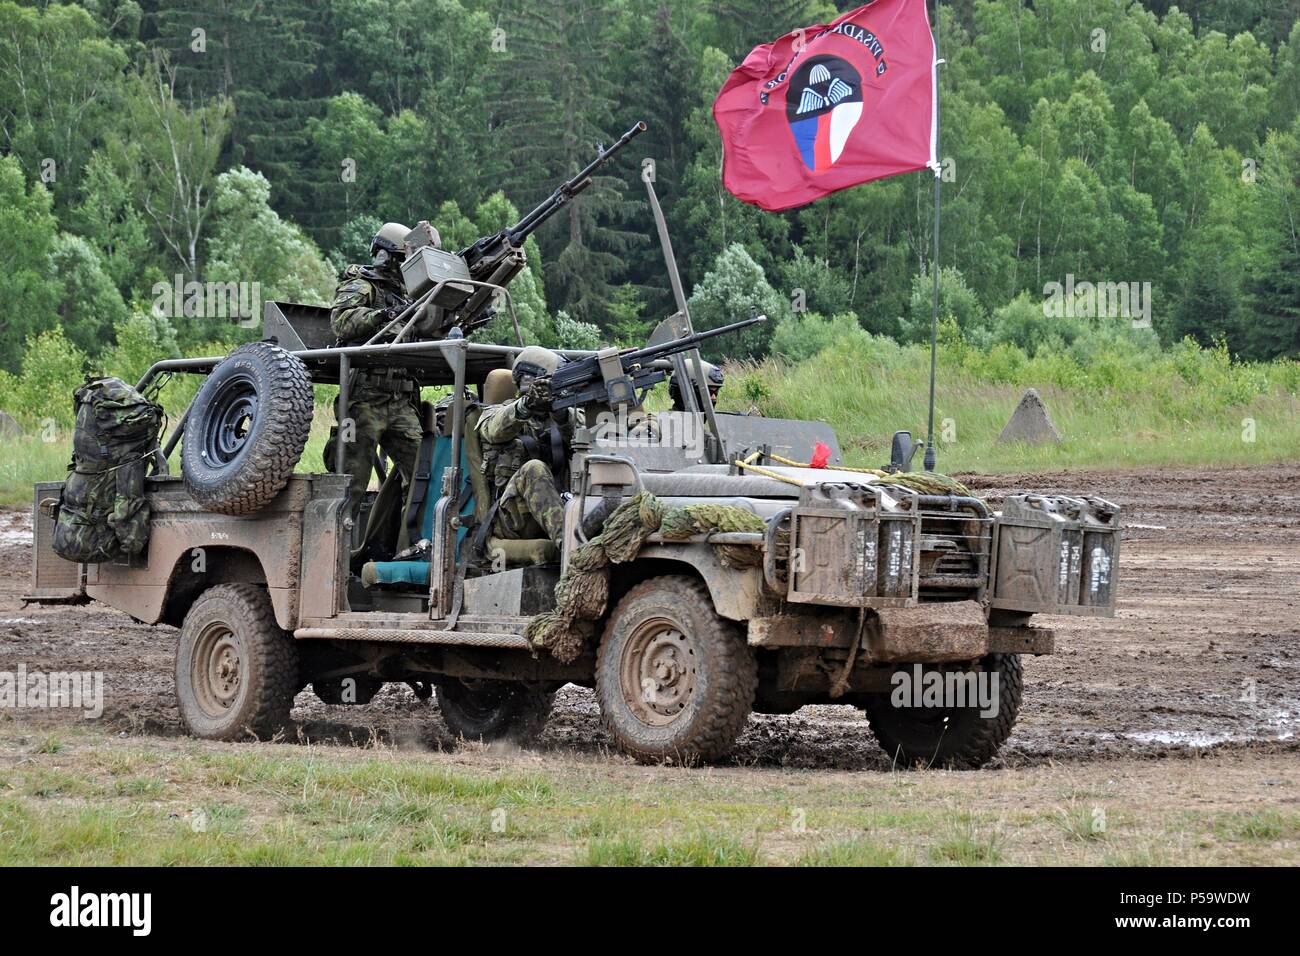 Strasice, Czech Republic. 23rd June, 2018. Land Rover Defender 130 vehicle is seen during the Ground Force Day Bahna 2018, presentation of military equipment and activities, in Strasice, Czech Republic, on June 23, 2018. Credit: Lada Peskova/CTK Photo/Alamy Live News Stock Photo